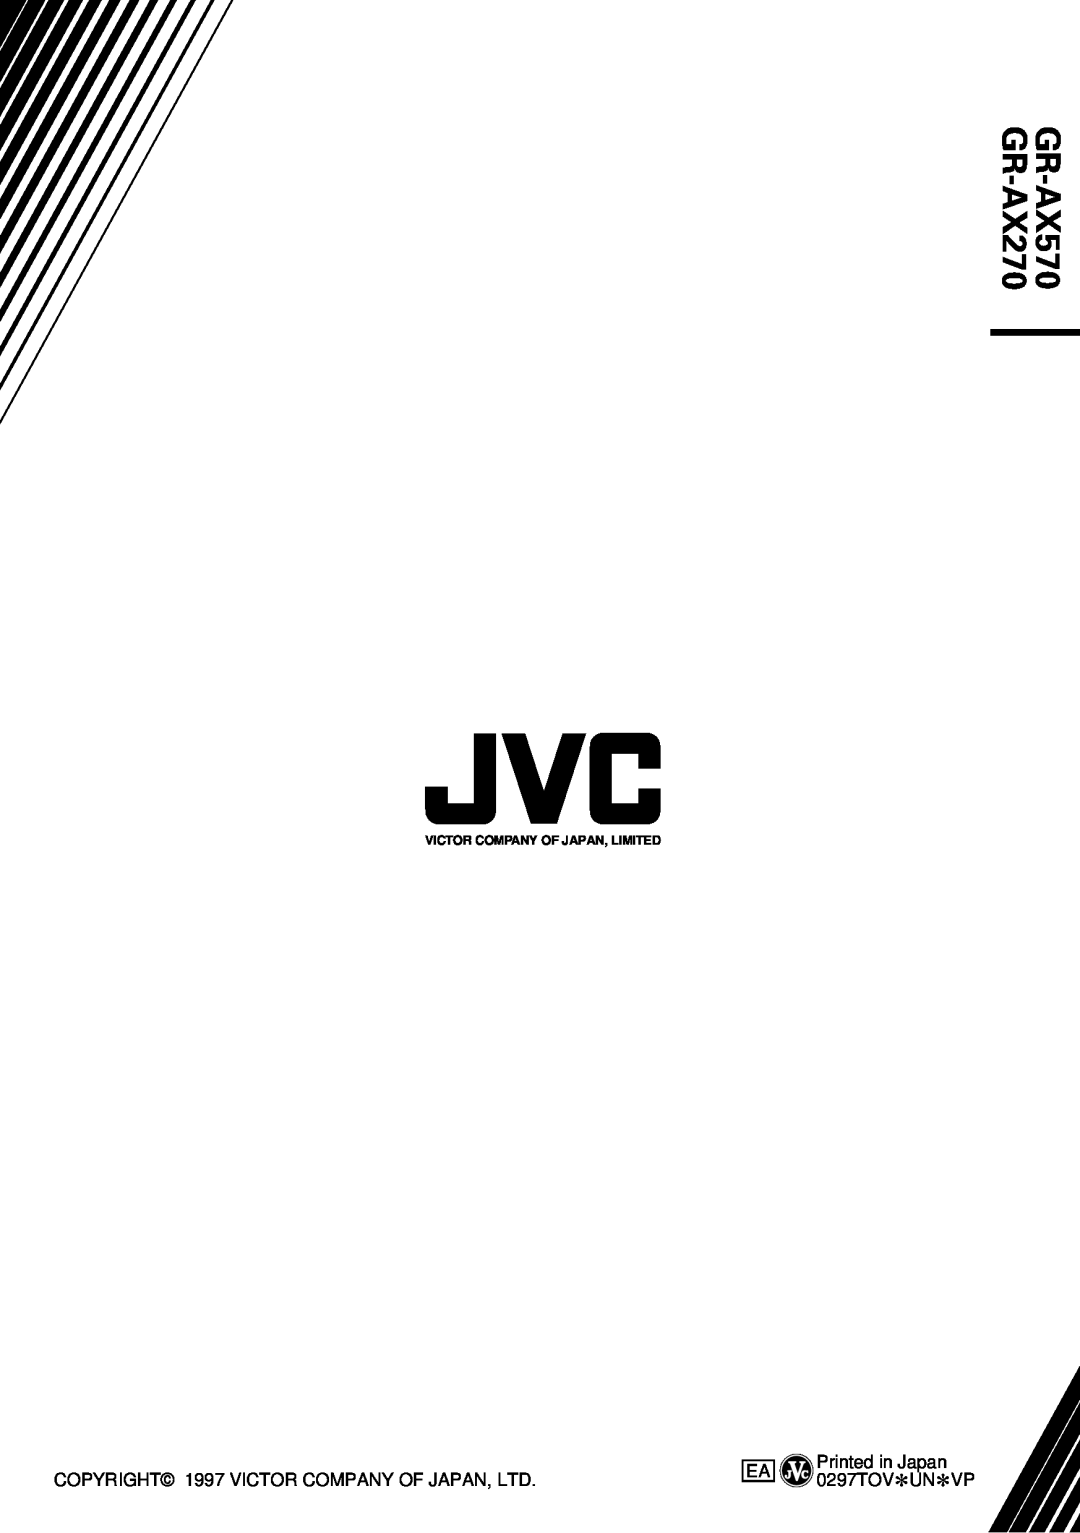 JVC GR-AX570 specifications GR-AX270, Printed in Japan 0297TOV*UN*VP, Victor Company Of Japan, Limited 